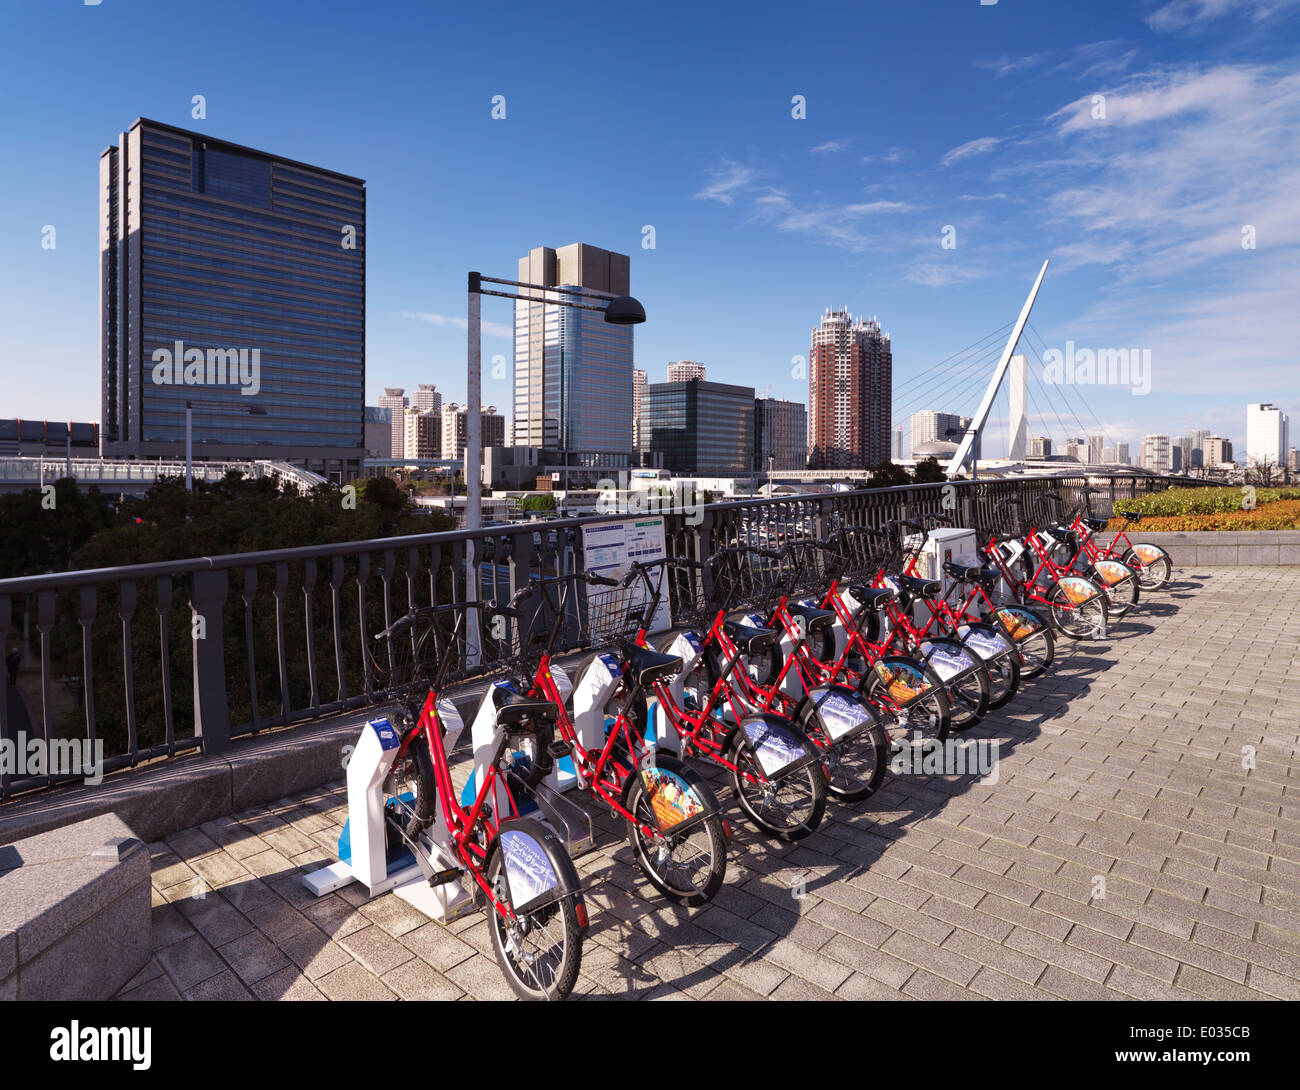 Rental bicycles on a street in Odaiba Tokyo Japan Stock Photo